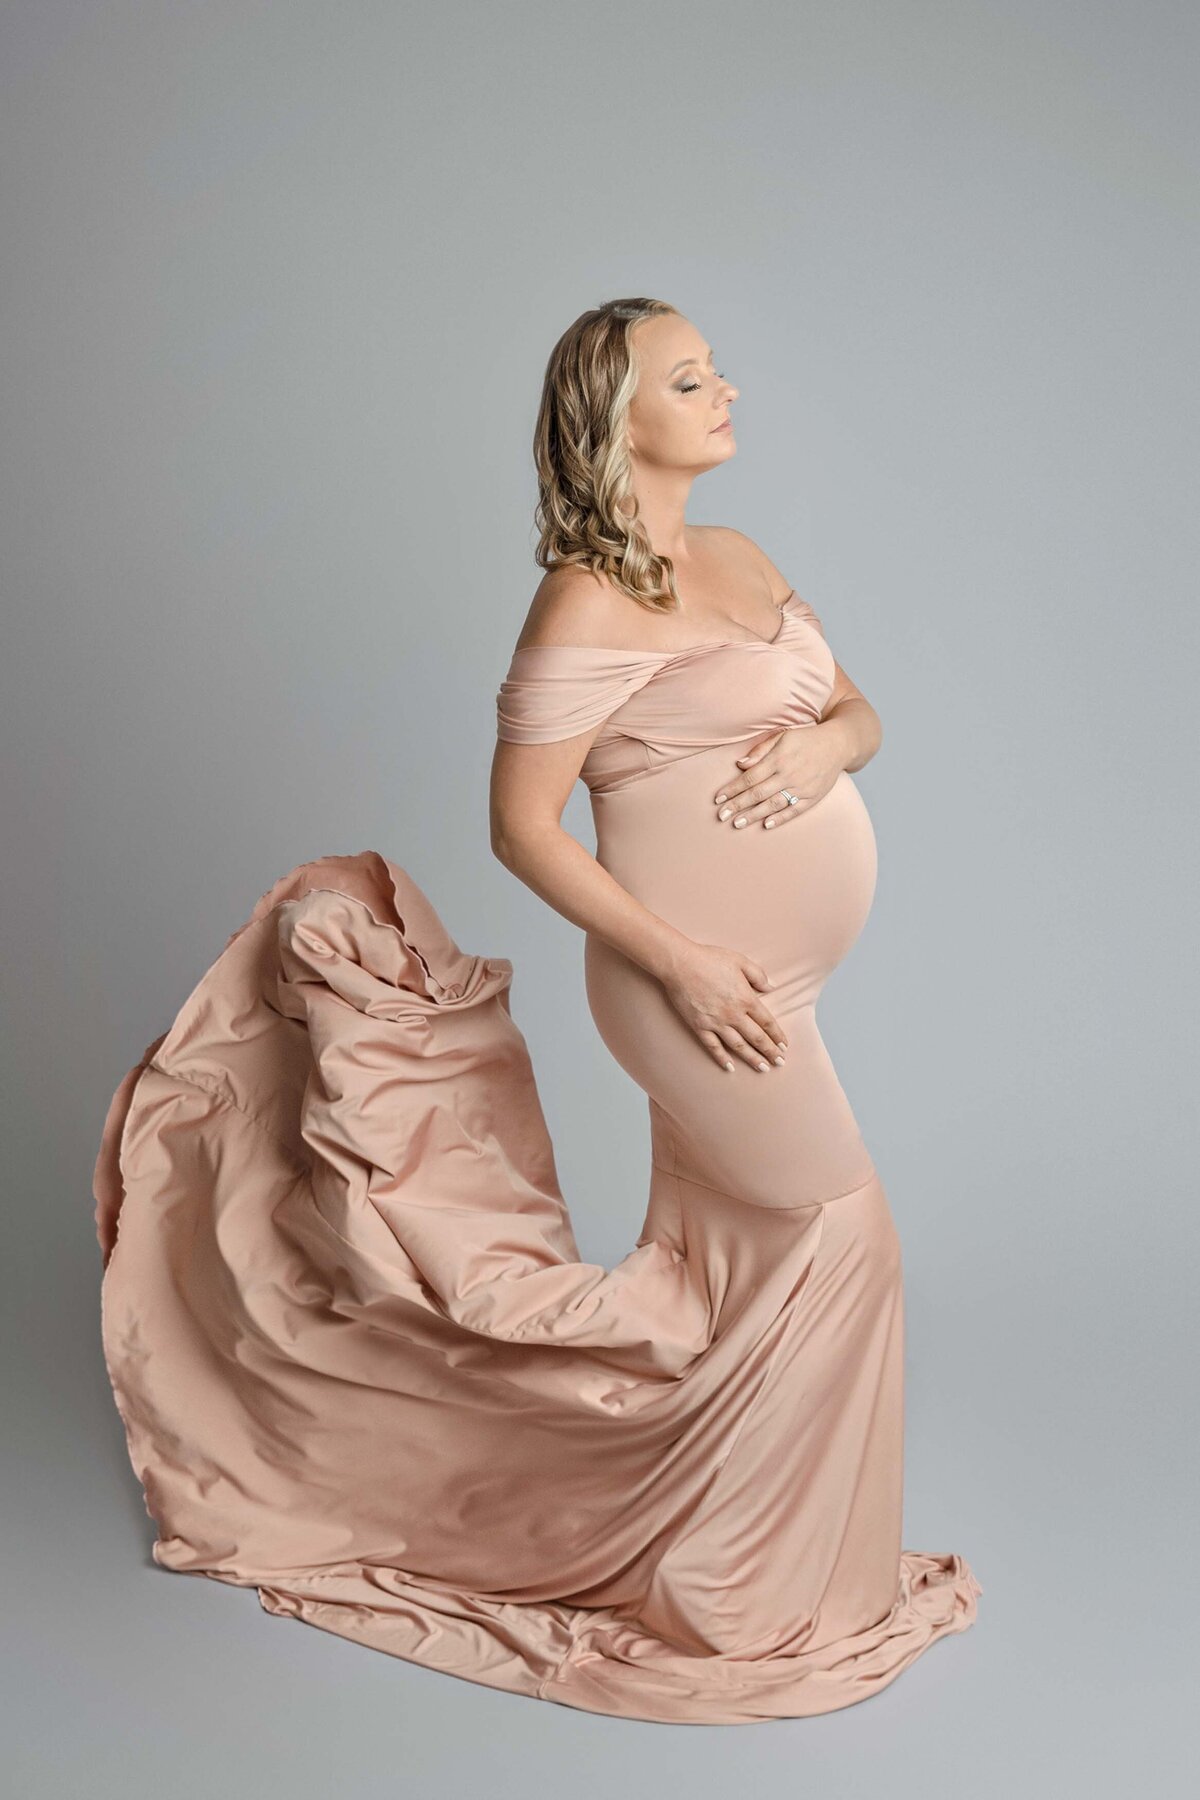 Expecting Mom Holding Belly Dressed In Pink Flowing Dress